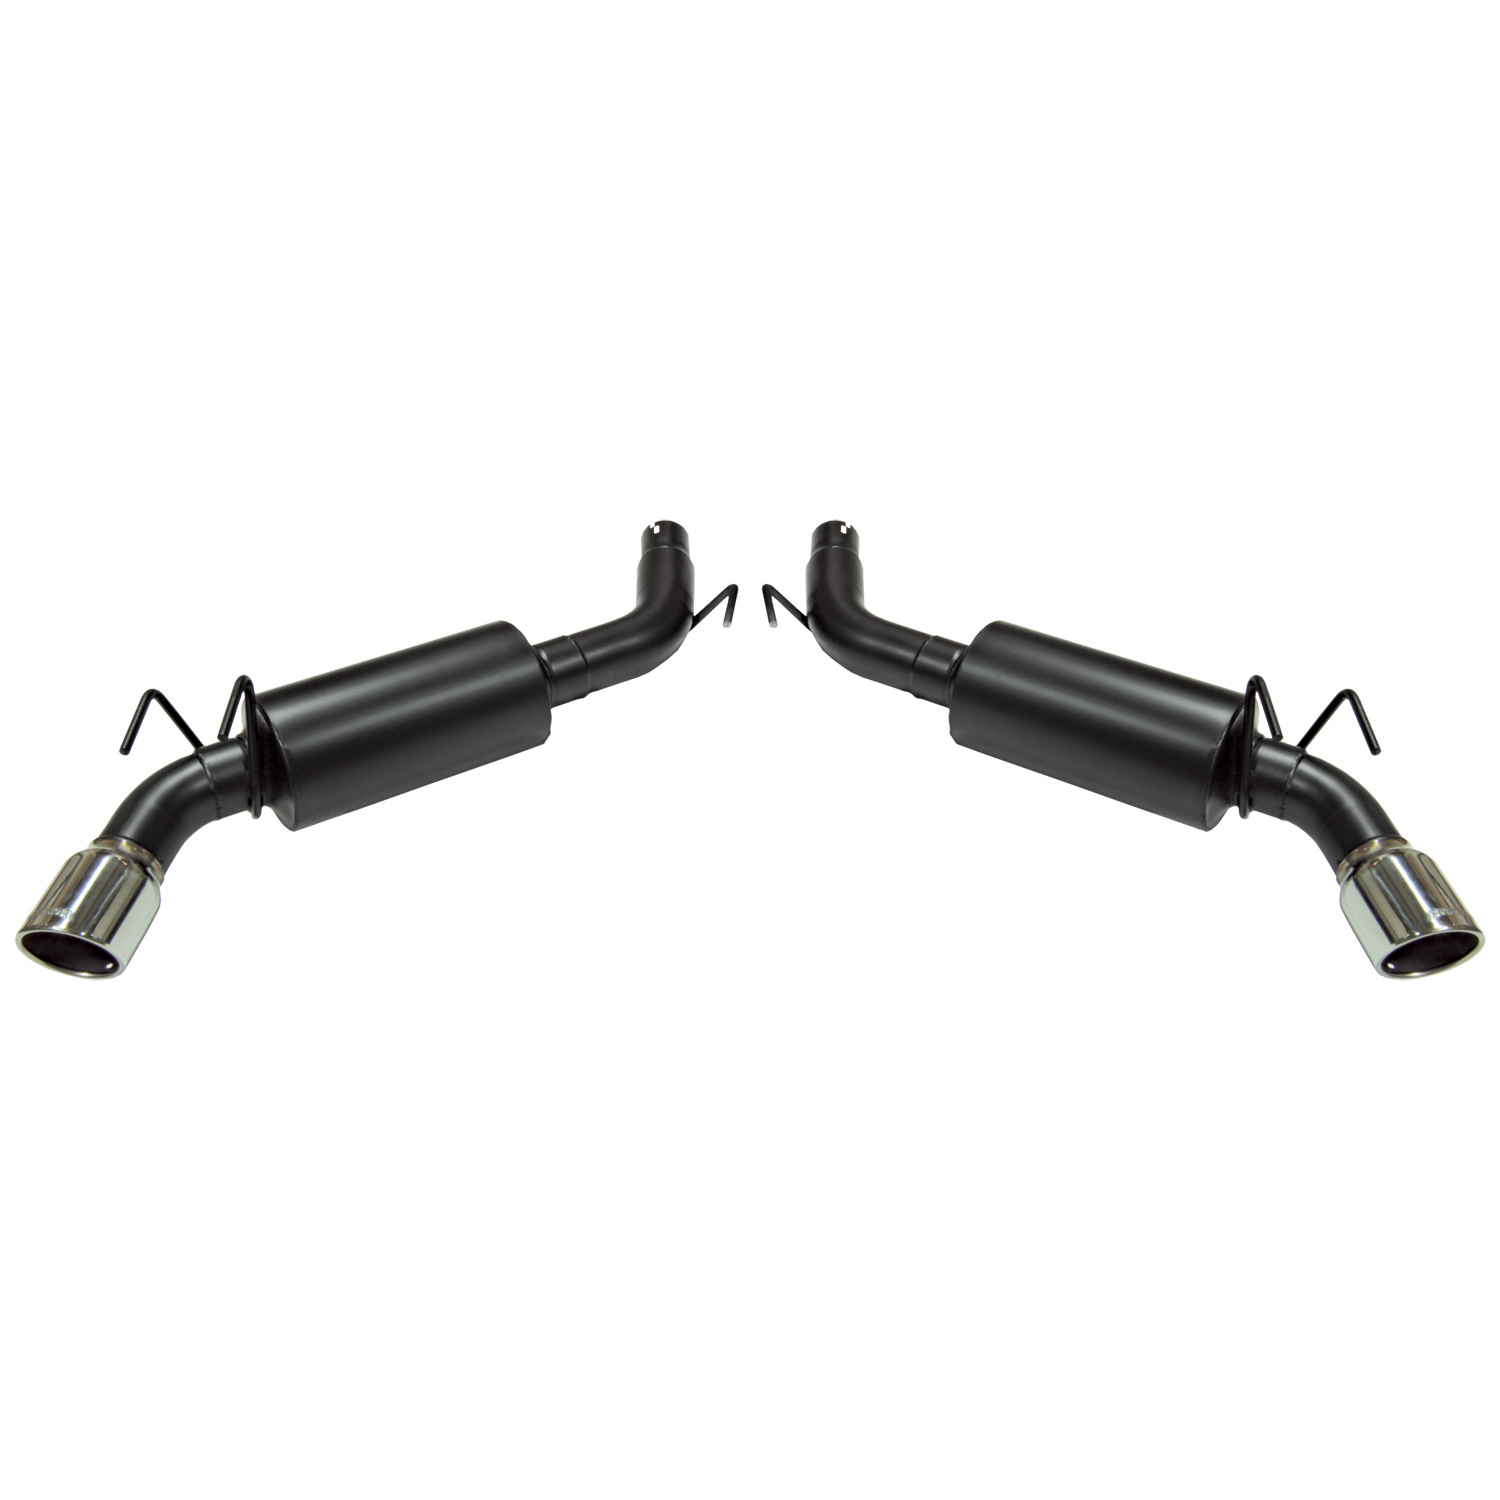 Flowmaster Flowmaster 819106 American Thunder Axle Back Exhaust System Fits 10-13 Camaro